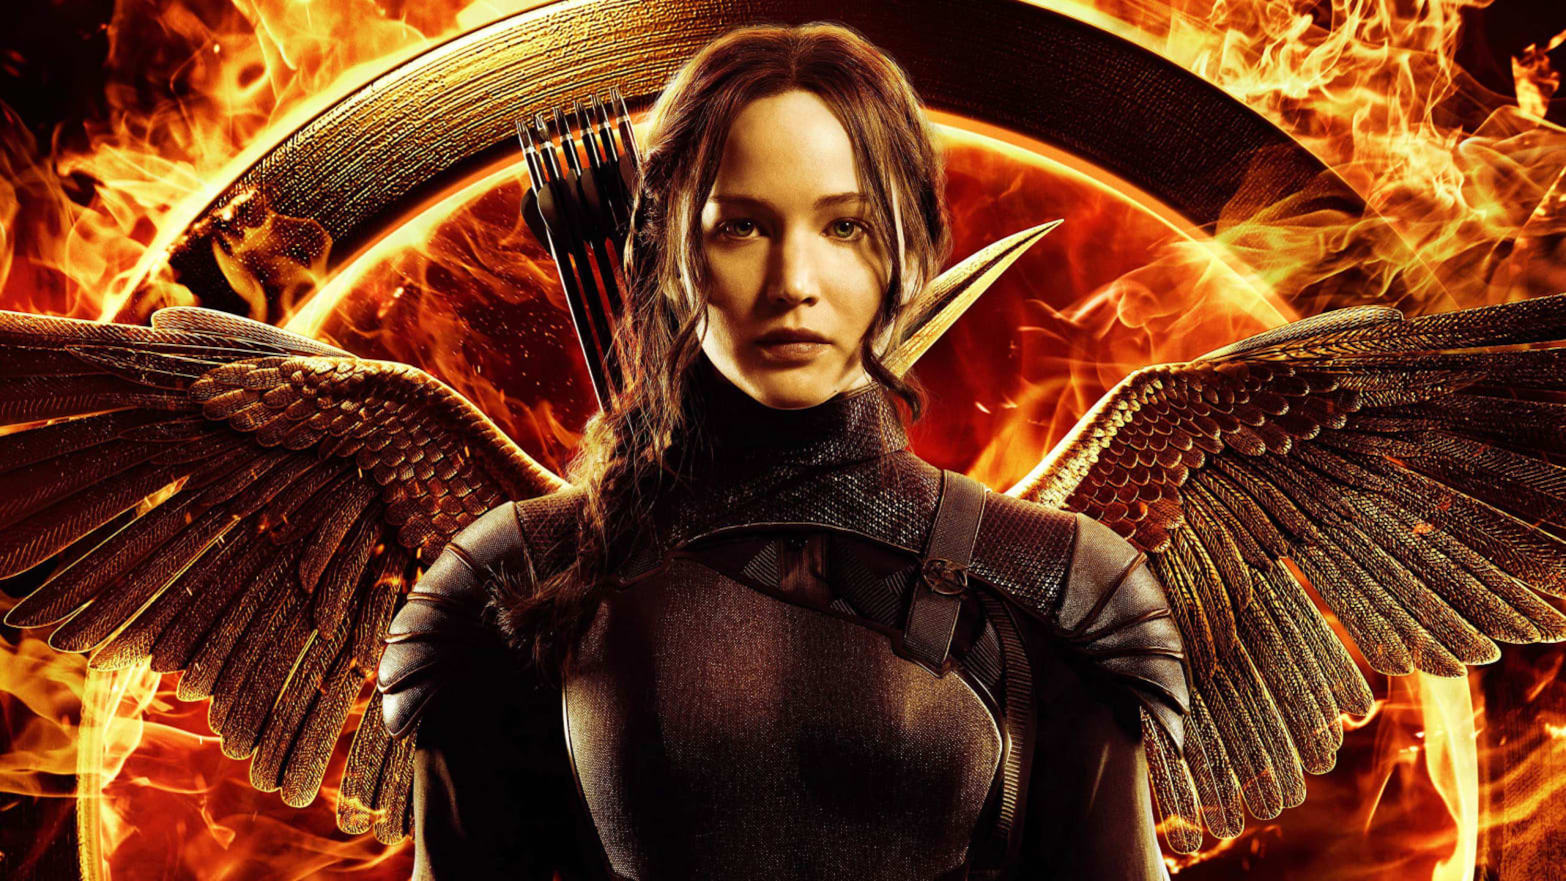 Hunger Games' Fans Torn on Prequel Announcement: Cringey Reboot or